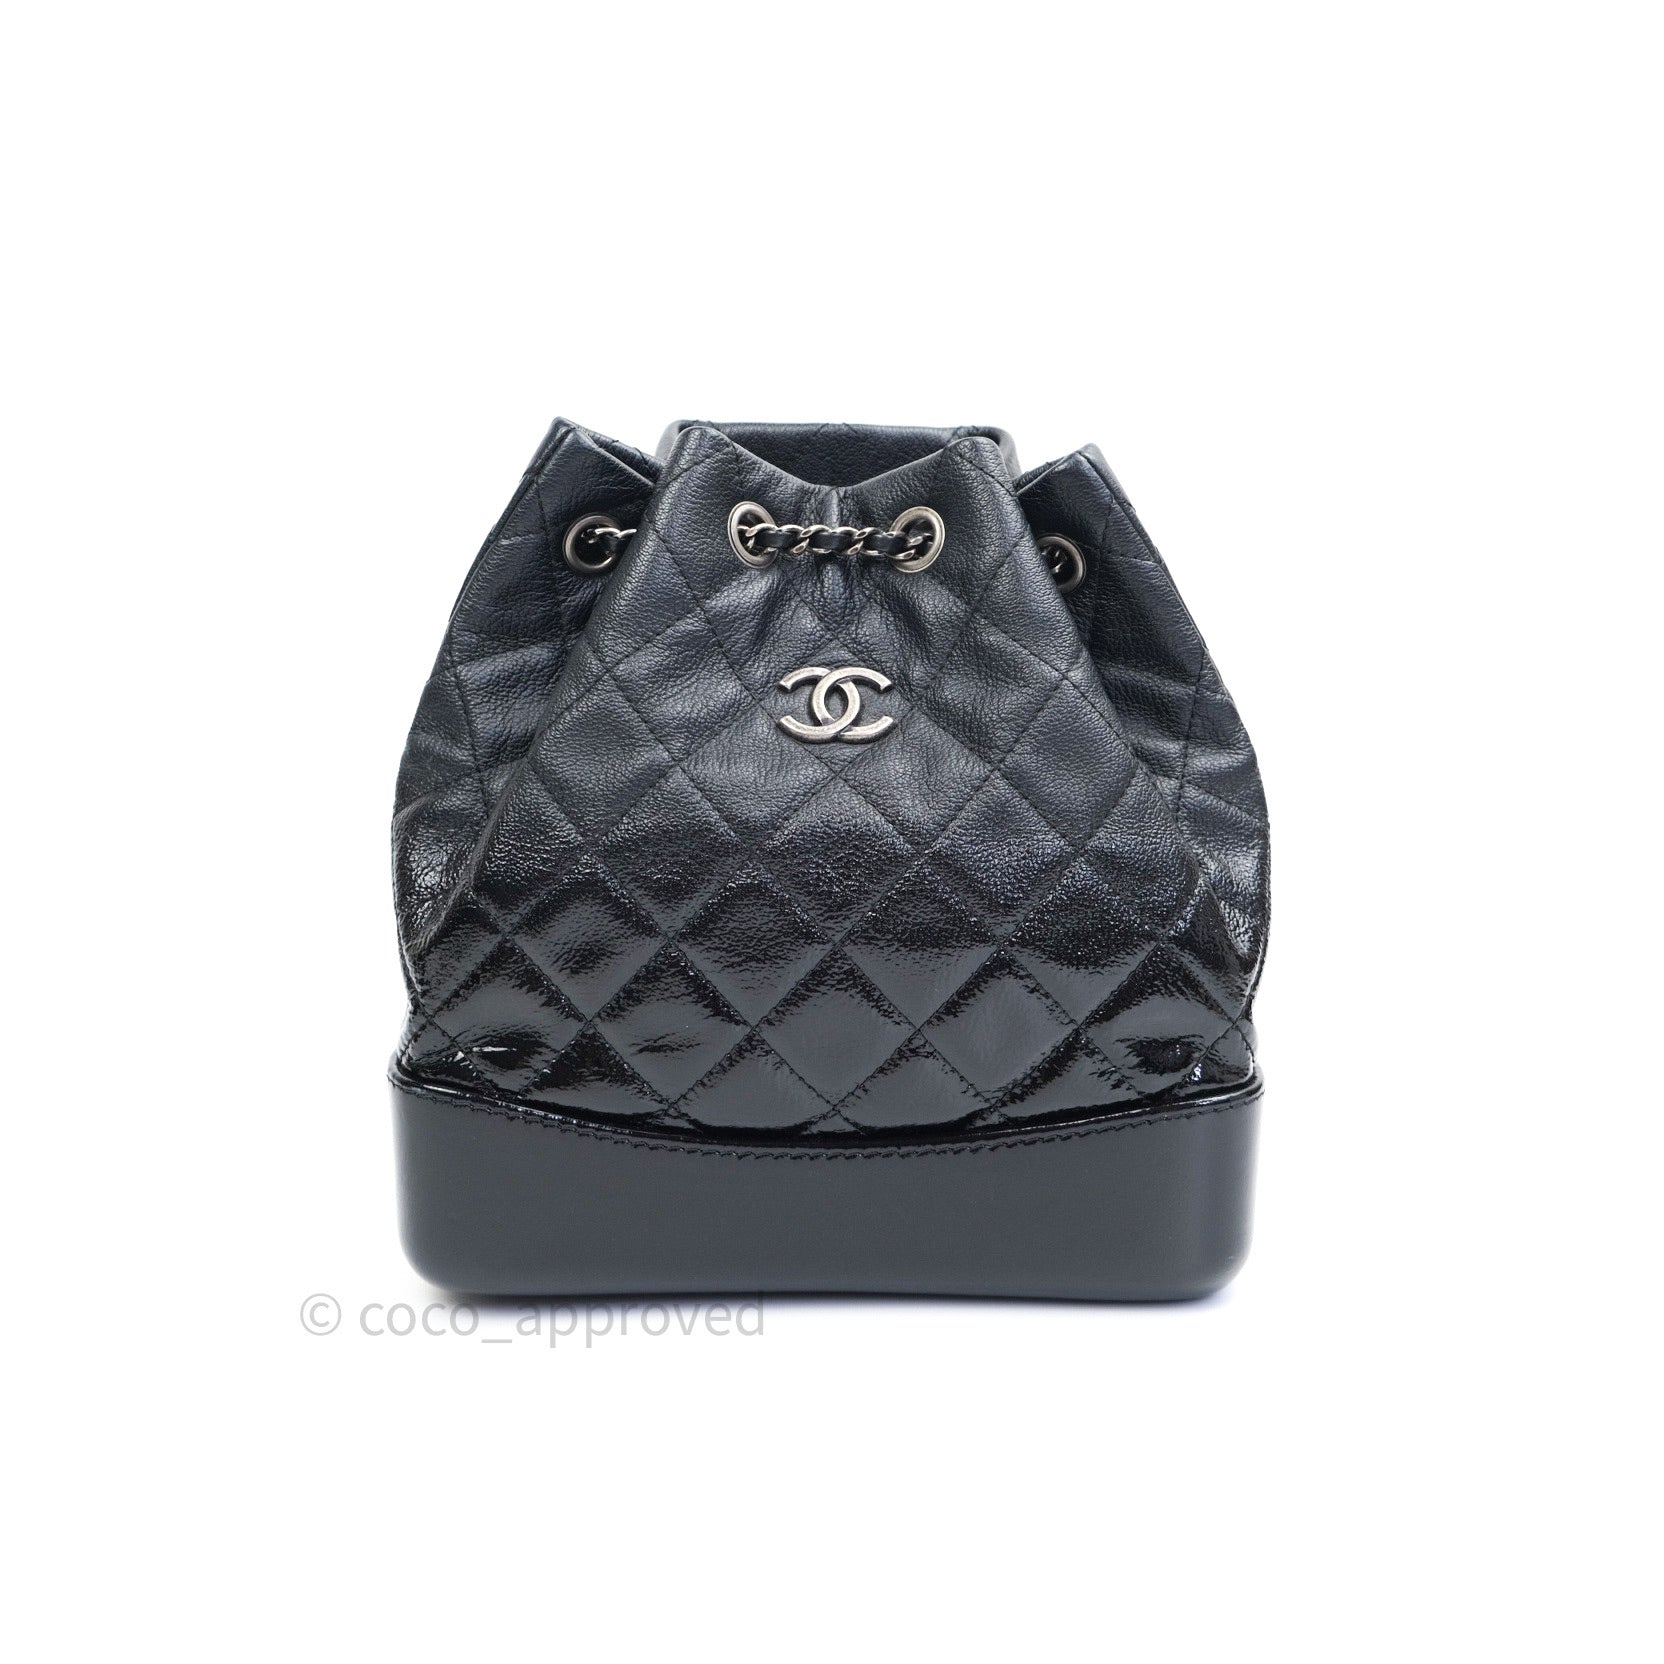 De'lux Bagz - Chanel Small Gabrielle backpack, preloved excellent  condition, comes with dust bag and authentic card (serial 24xxxxxx), price  RM 13xxx